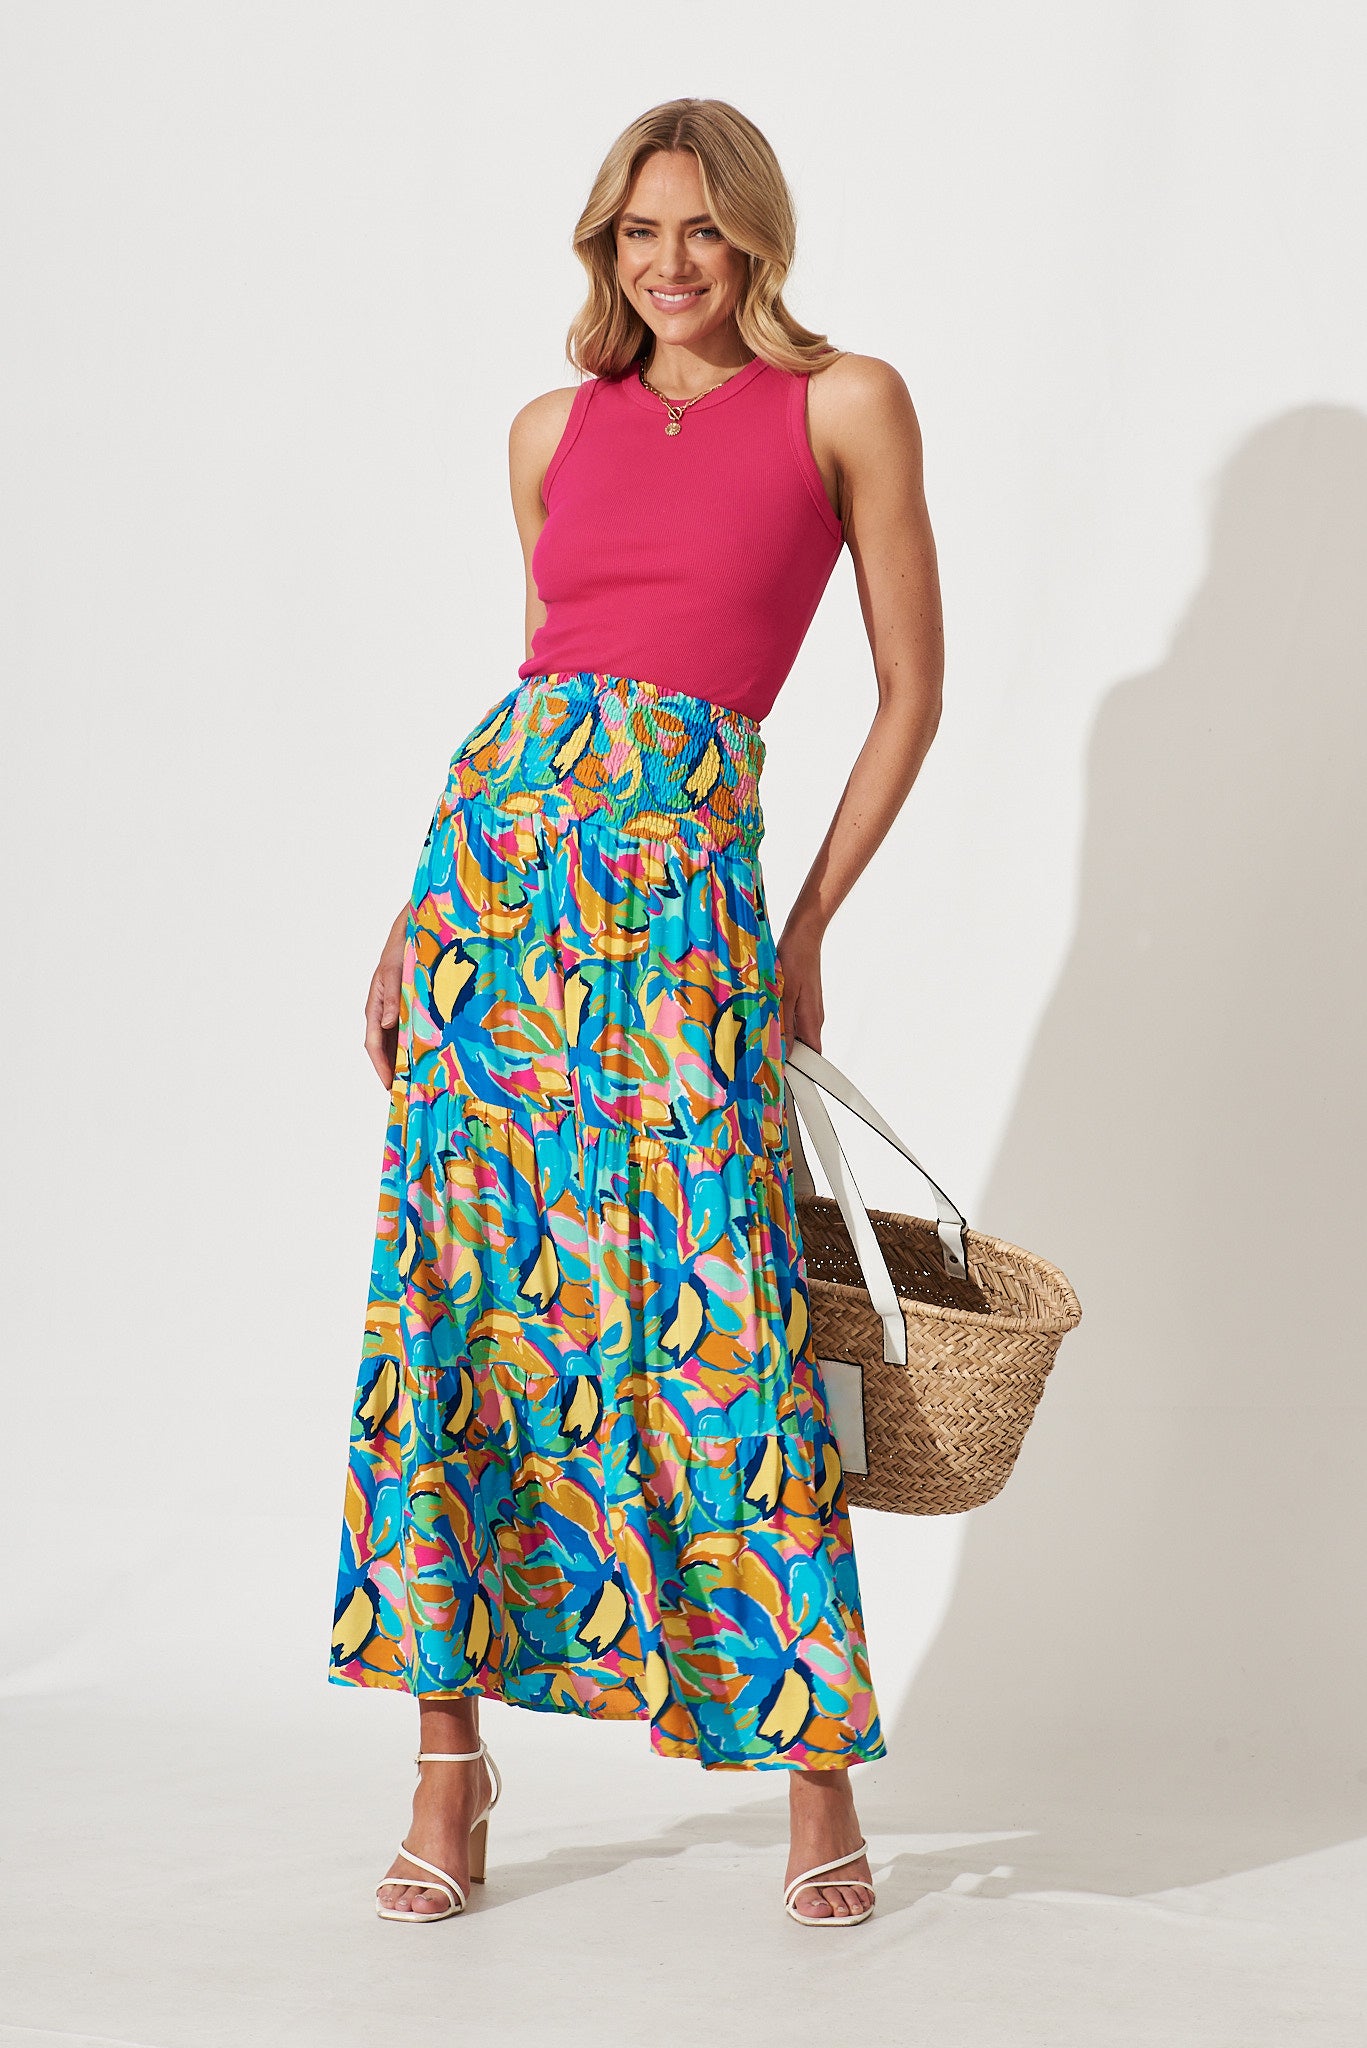 Macarena Maxi Skirt In Bright Abstract Floral Print - full length